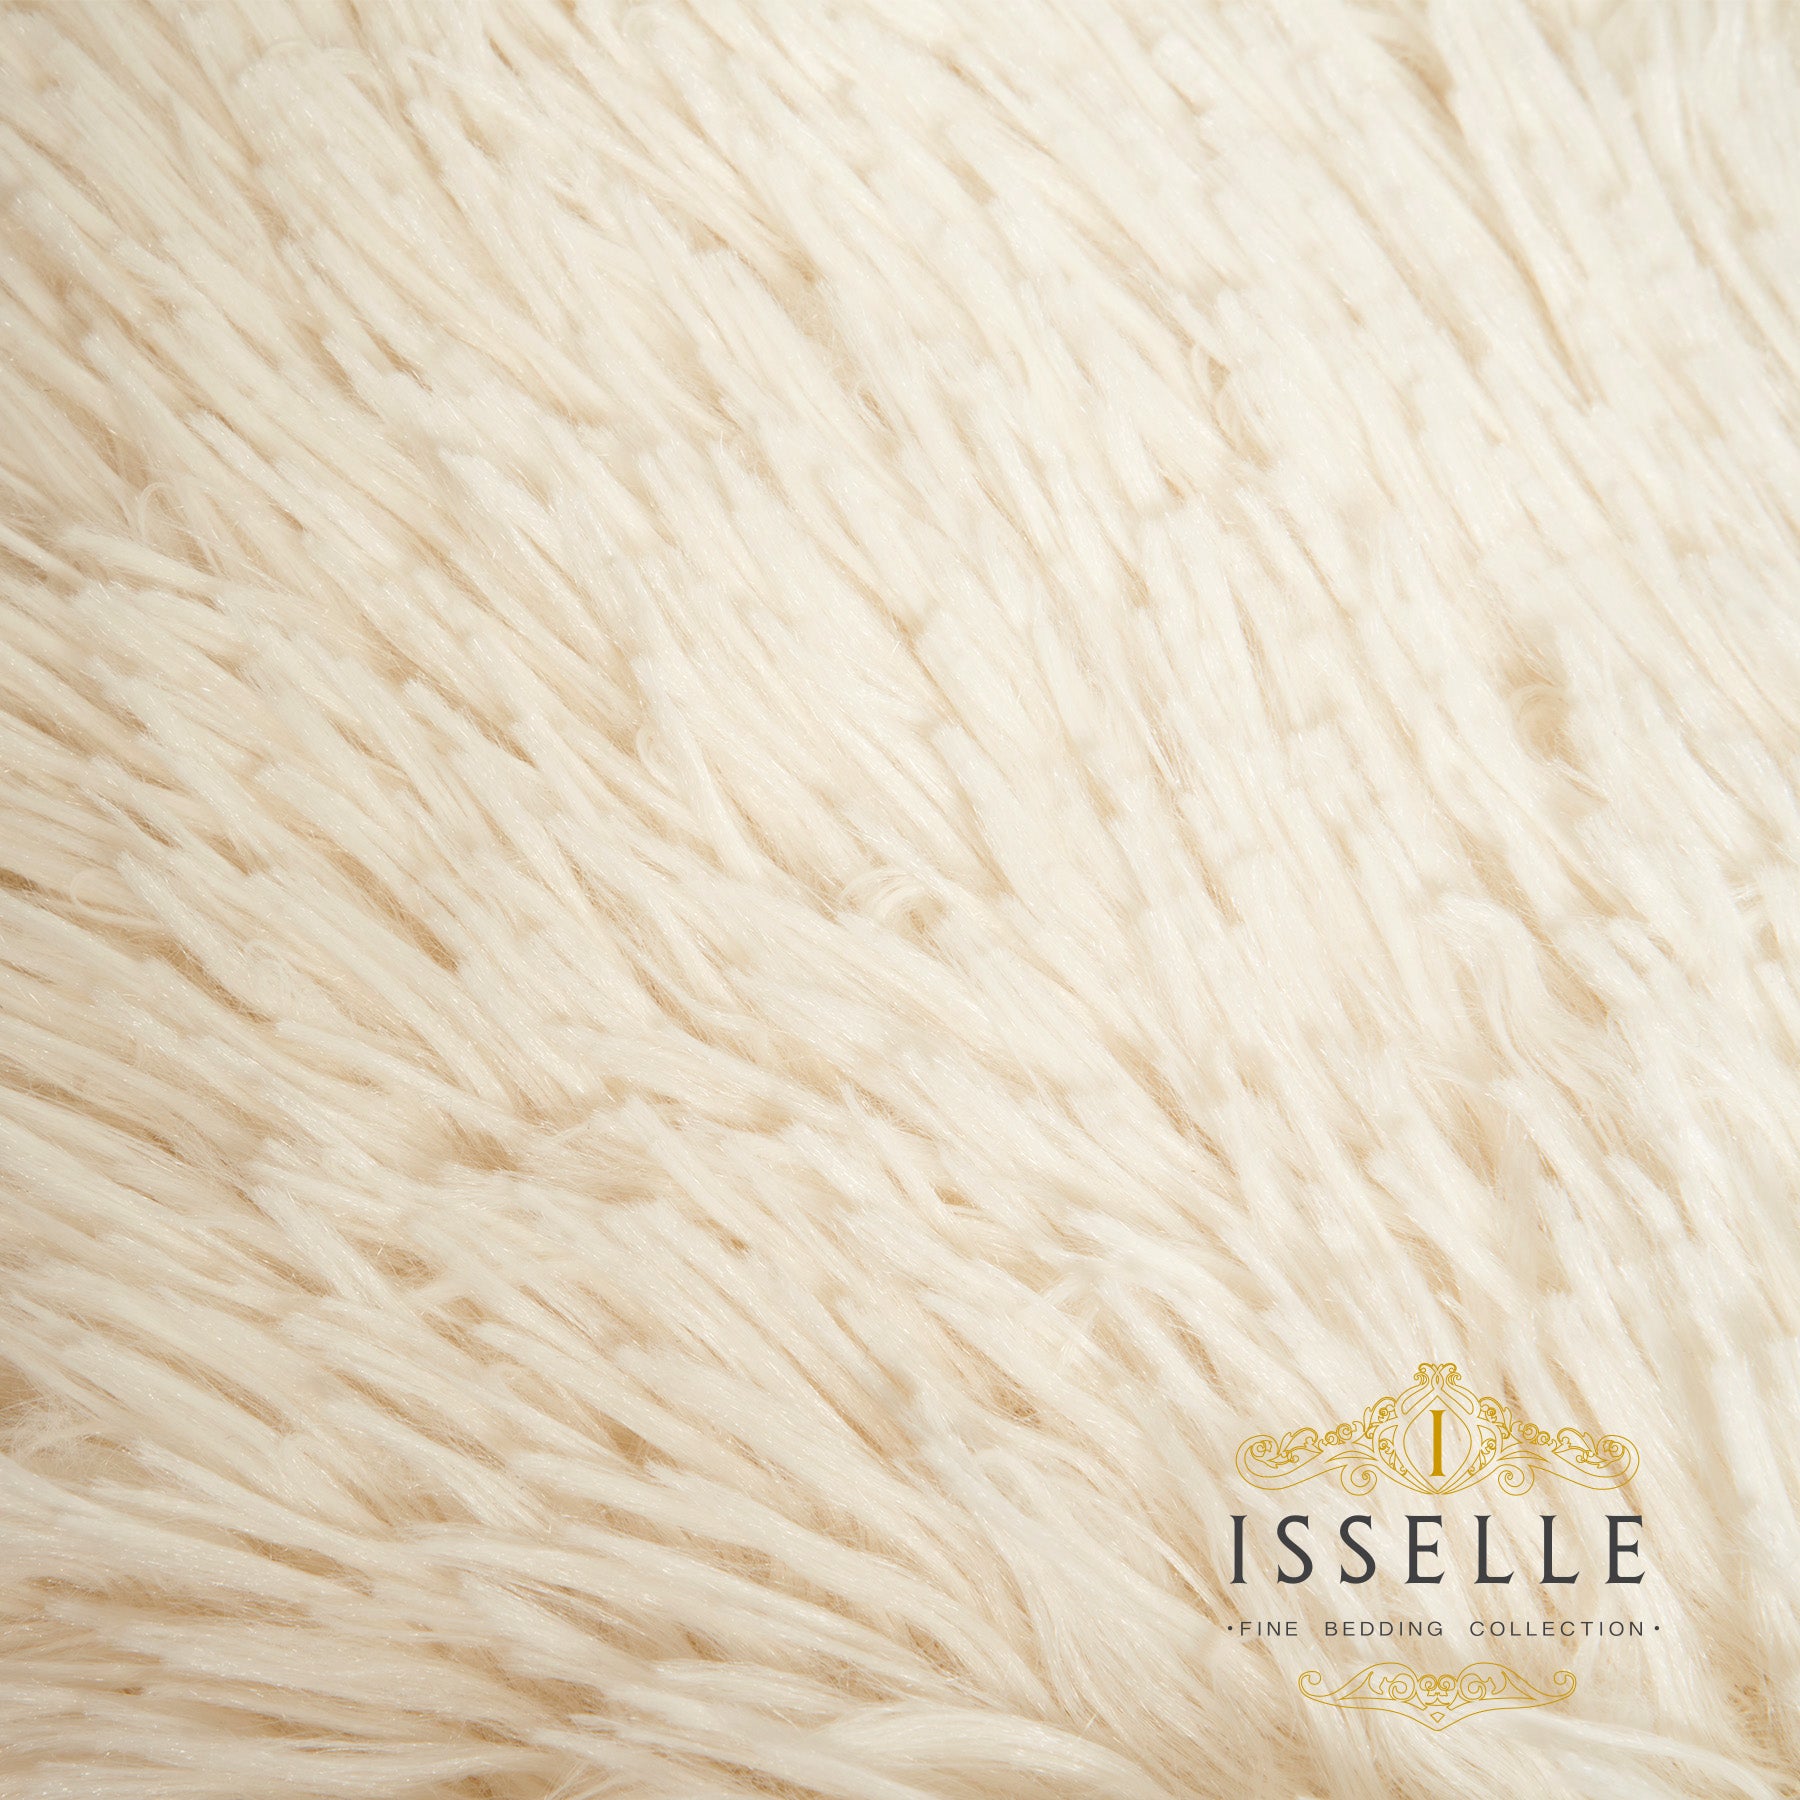 Isselle Vermont Faux Fur Throw - Creamy Ivory